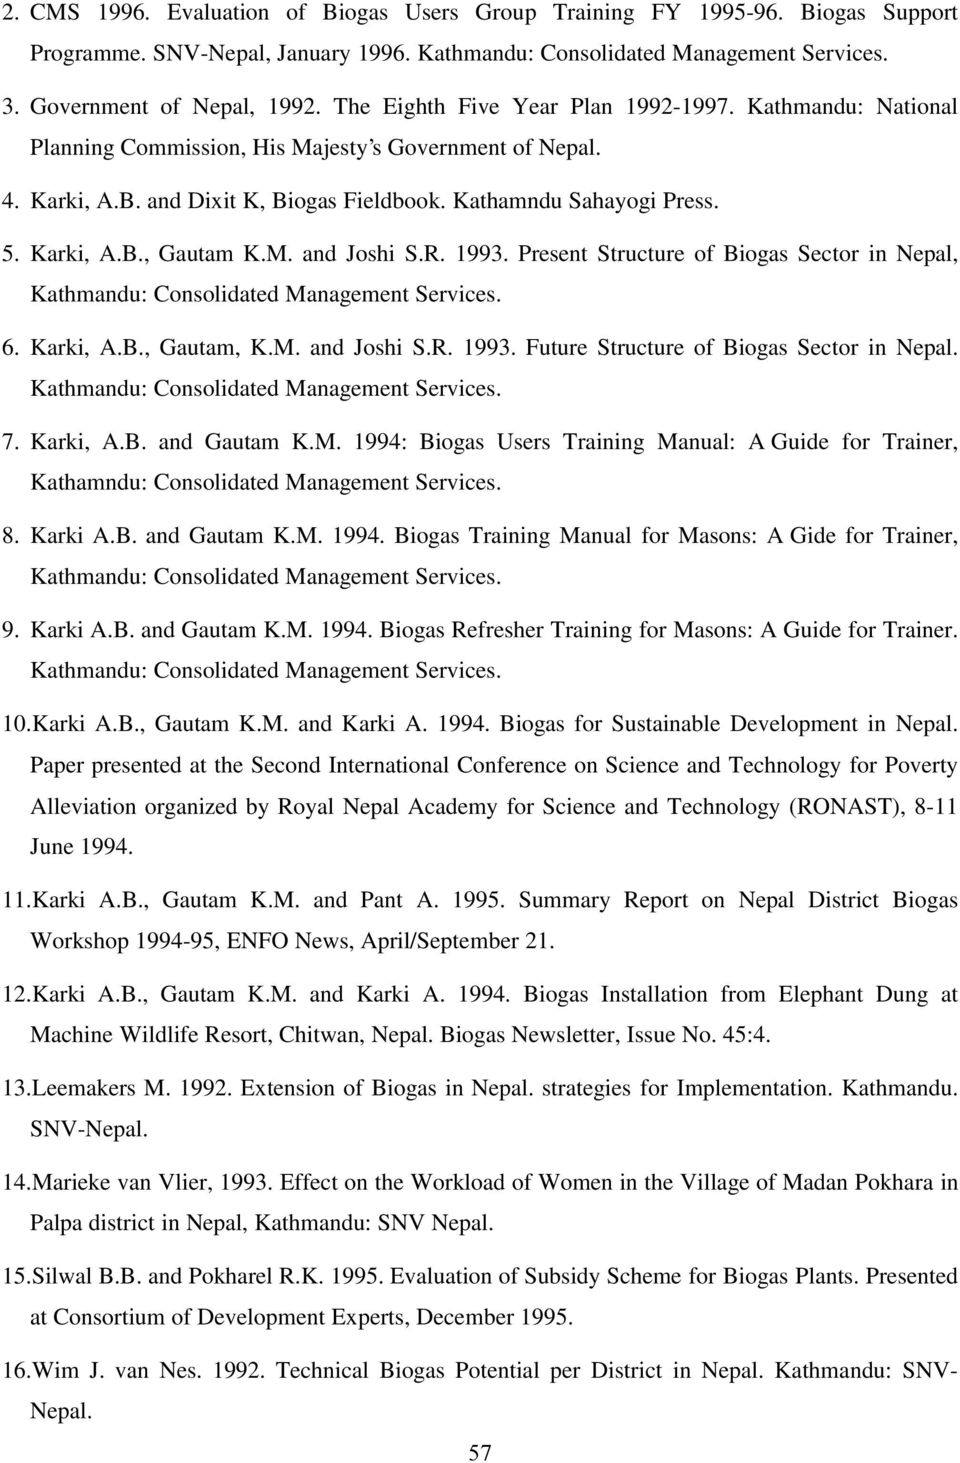 M. and Joshi S.R. 1993. Present Structure of Biogas Sector in Nepal, Kathmandu: Consolidated Management Services. 6. Karki, A.B., Gautam, K.M. and Joshi S.R. 1993. Future Structure of Biogas Sector in Nepal.